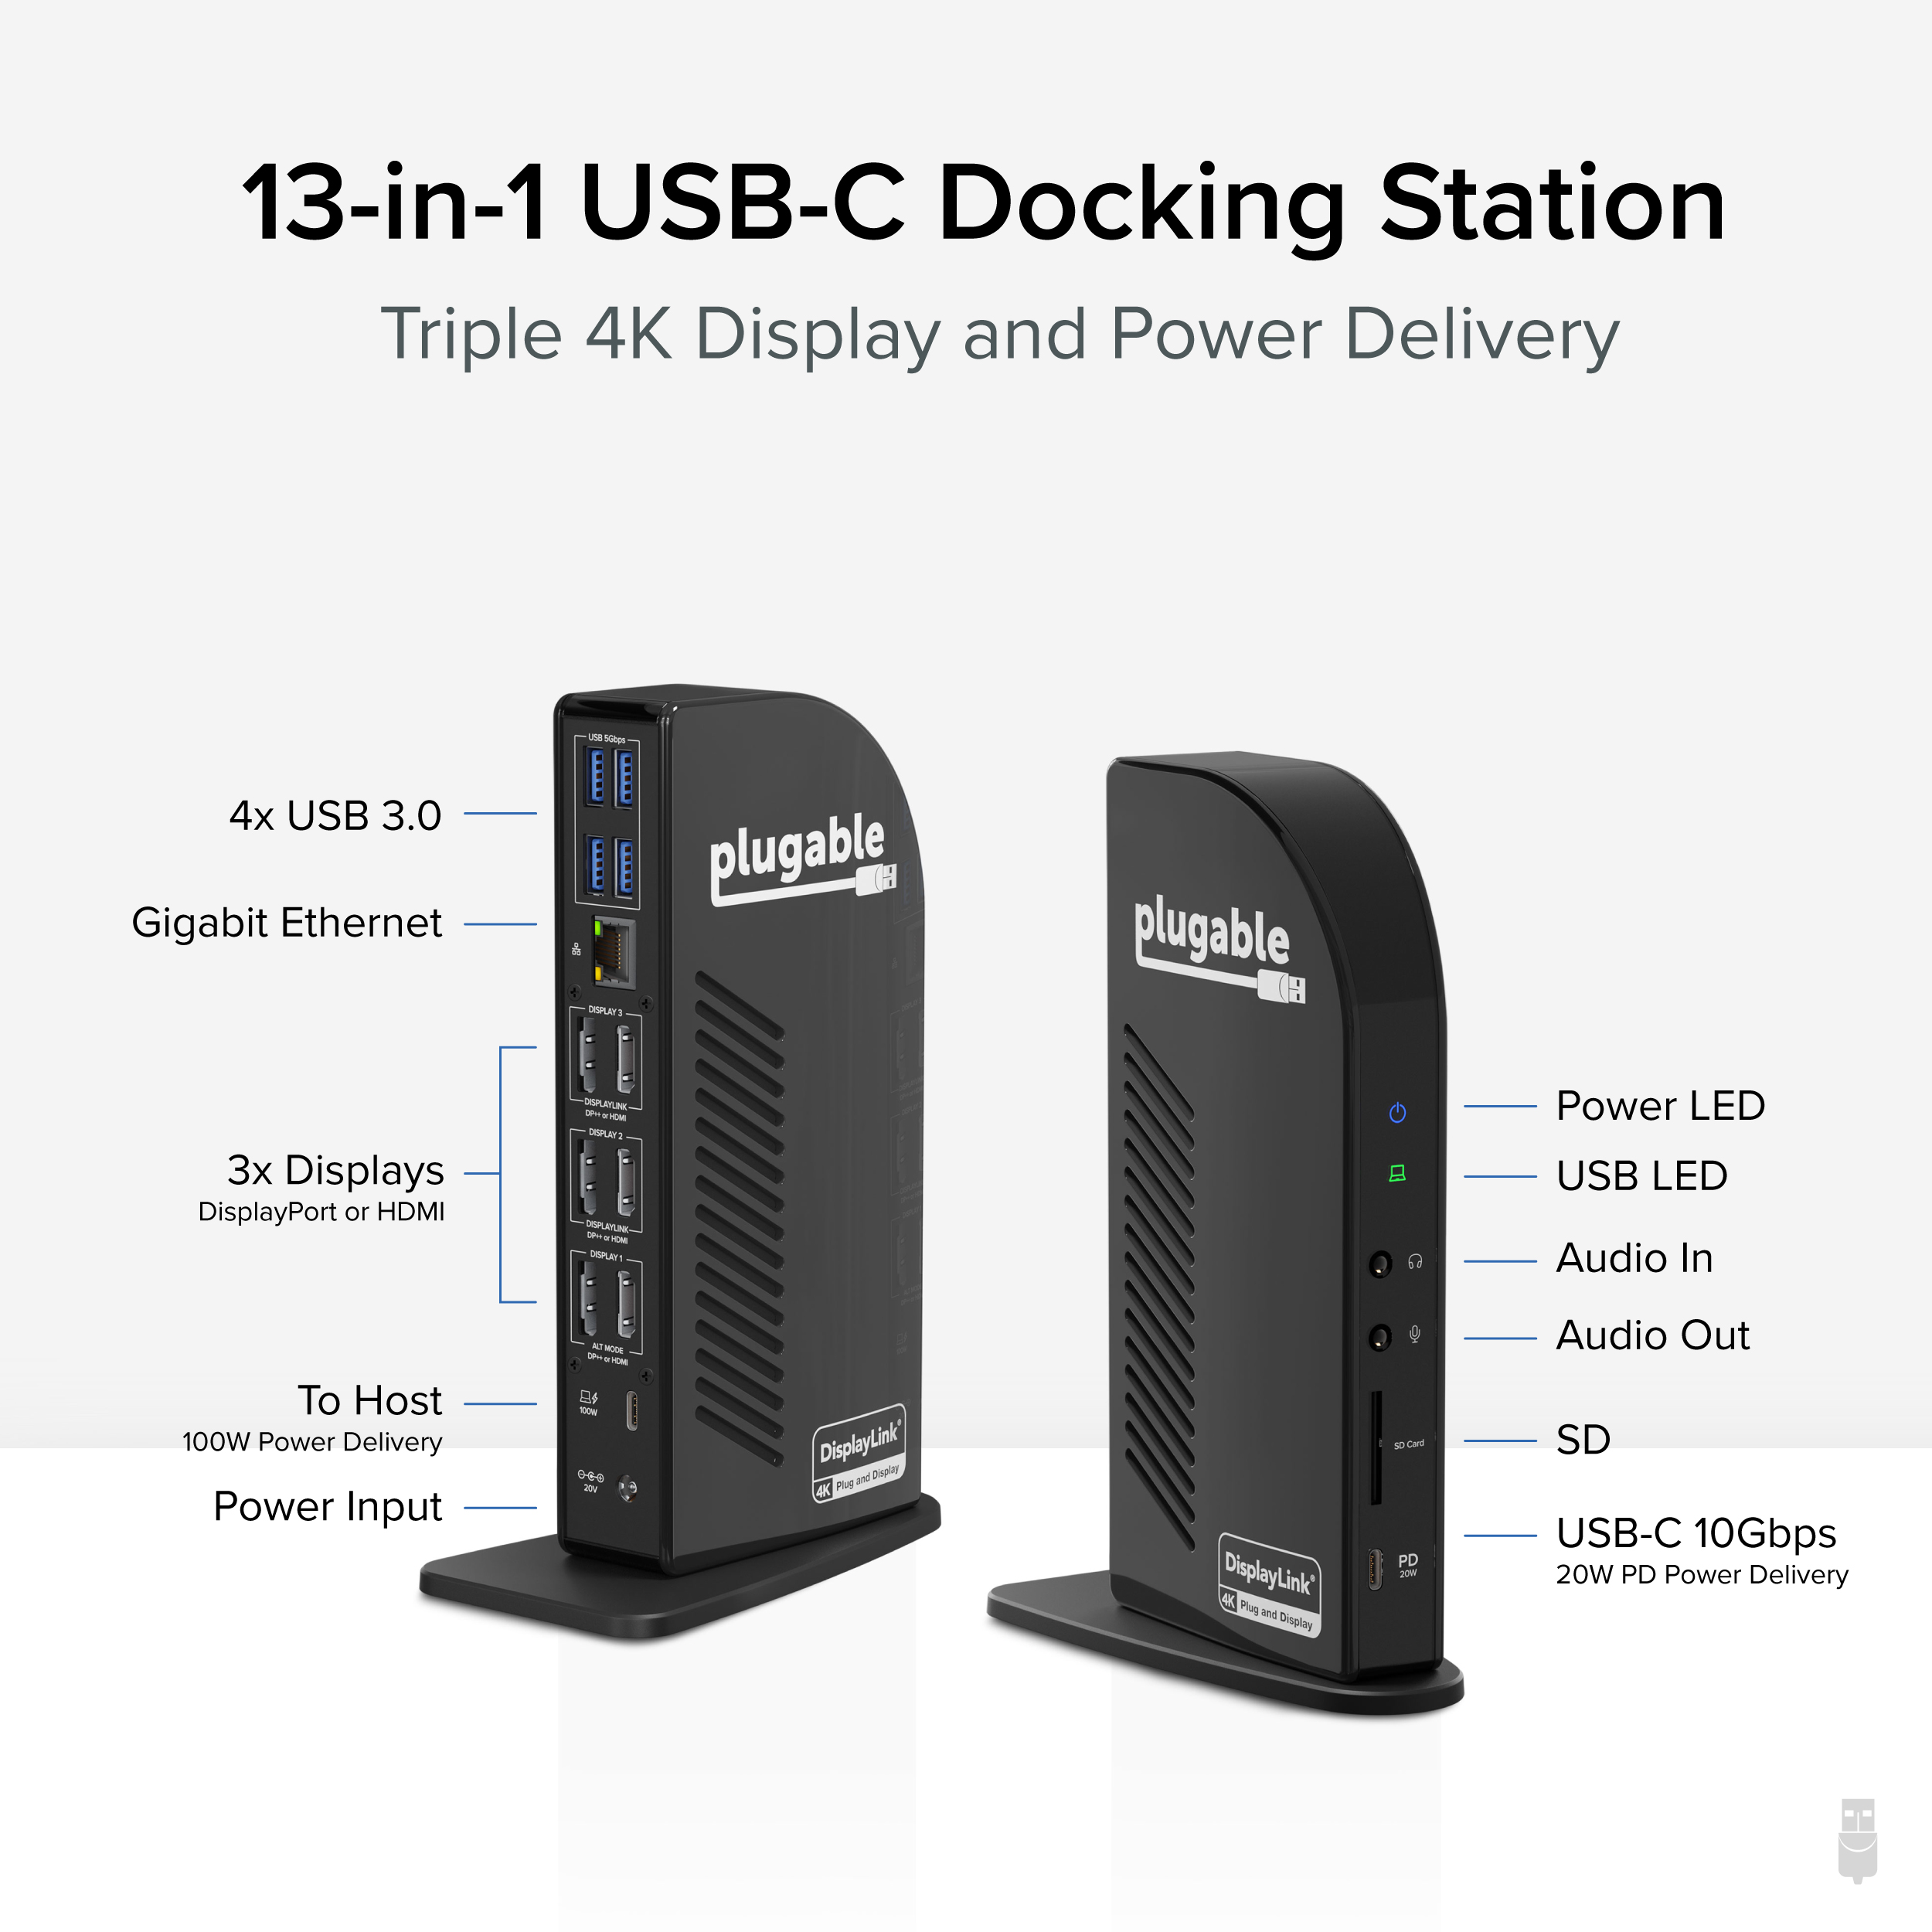 Plugable 4K USB C Docking Station Triple Monitor with 100W Power Delivery, USB C Dock for Thunderbolt 3/4, and USB-C Windows and Mac (3x HDMI and 3x DisplayPort, 1x USB-C, 4x USB 3.0, SD Card Reader) - image 2 of 7